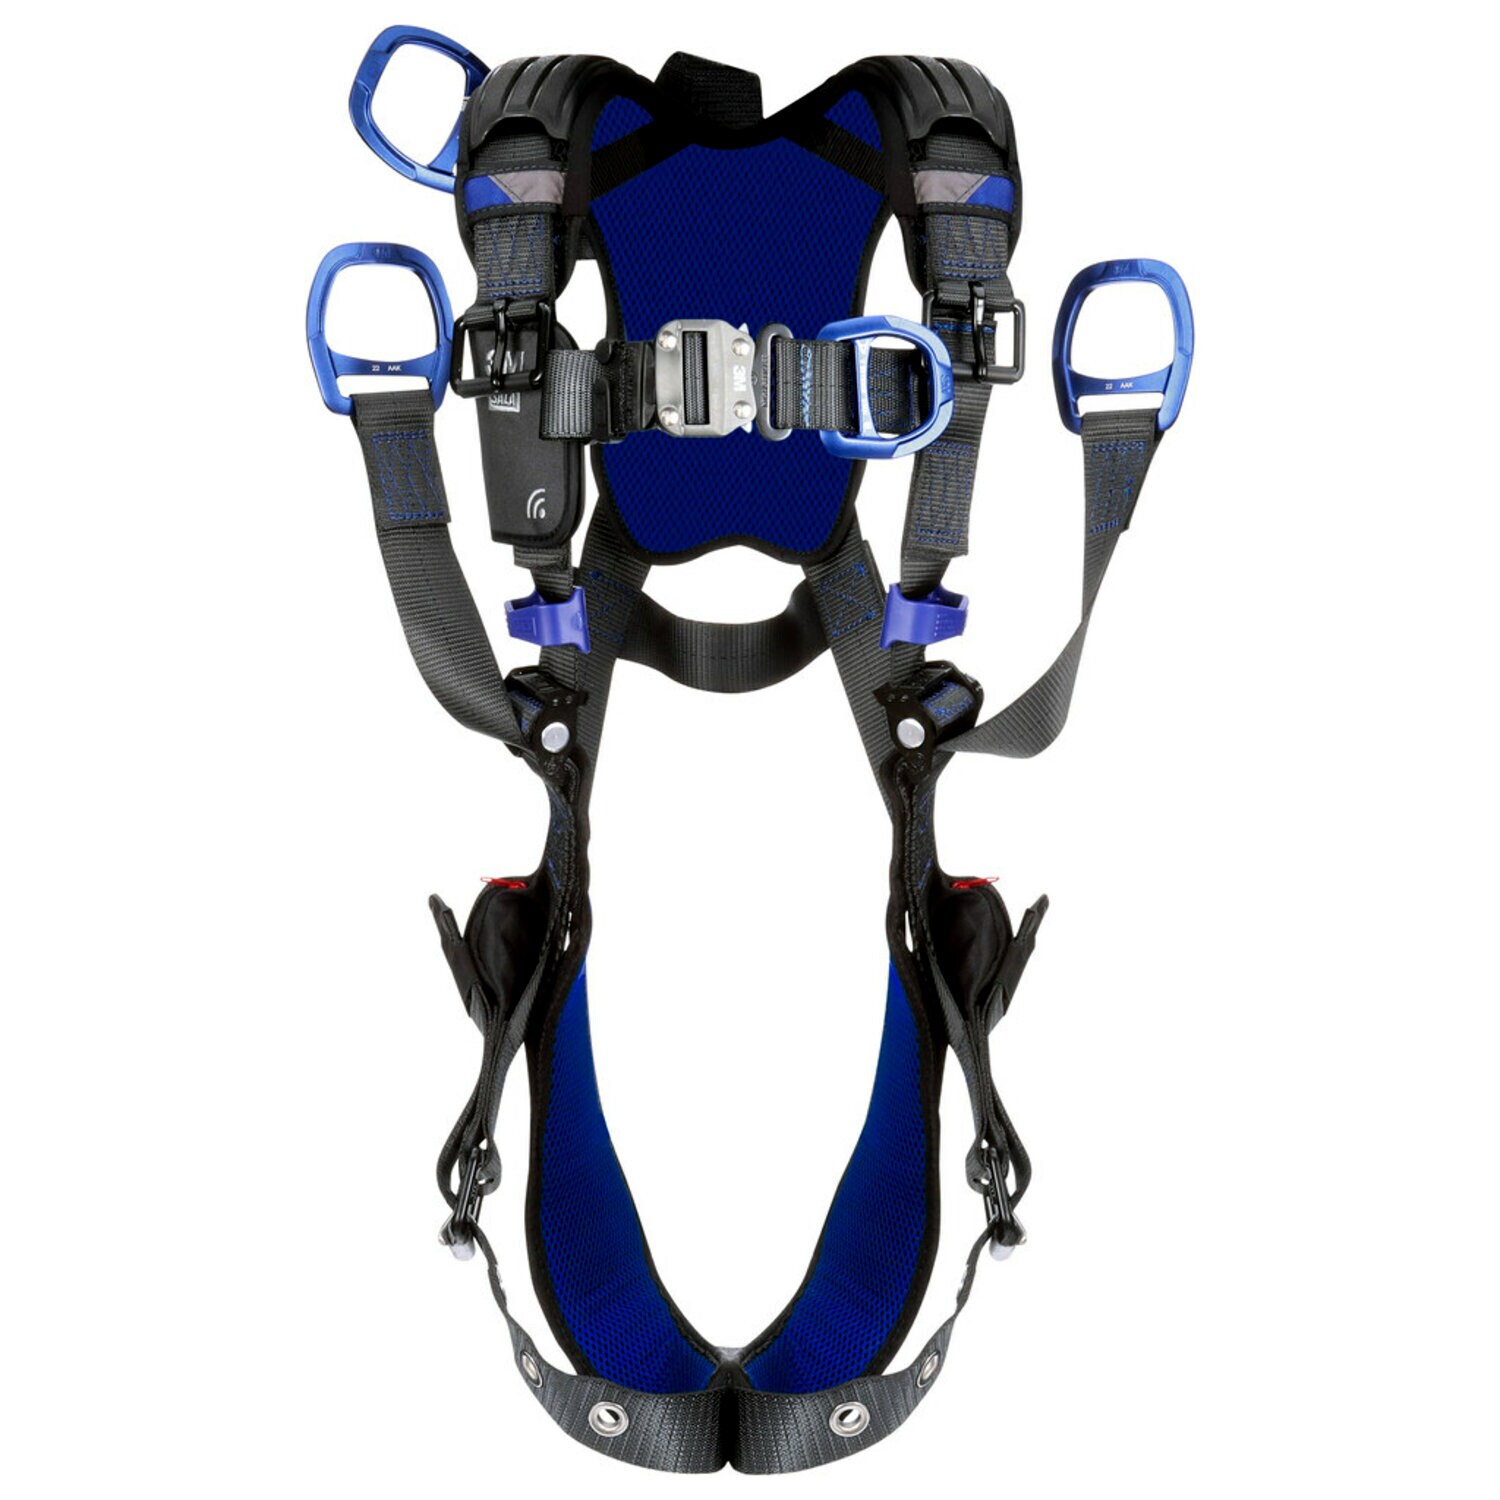 7012818052 - 3M DBI-SALA ExoFit X300 Comfort Oil and Gas Climbing/Lifting Safety Harness with Tongue Buckle Belt Connector 1403225, Large